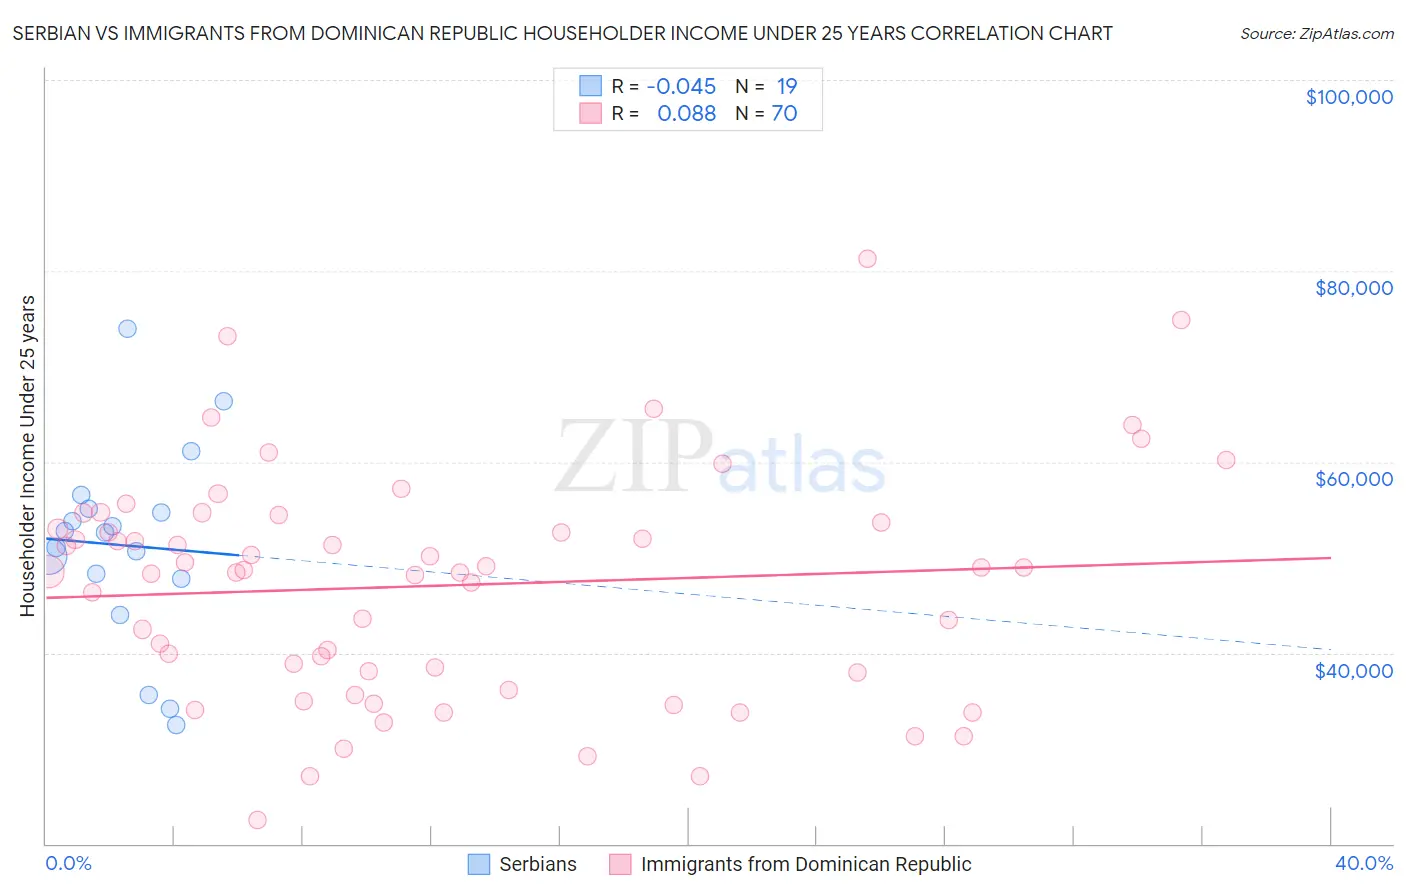 Serbian vs Immigrants from Dominican Republic Householder Income Under 25 years